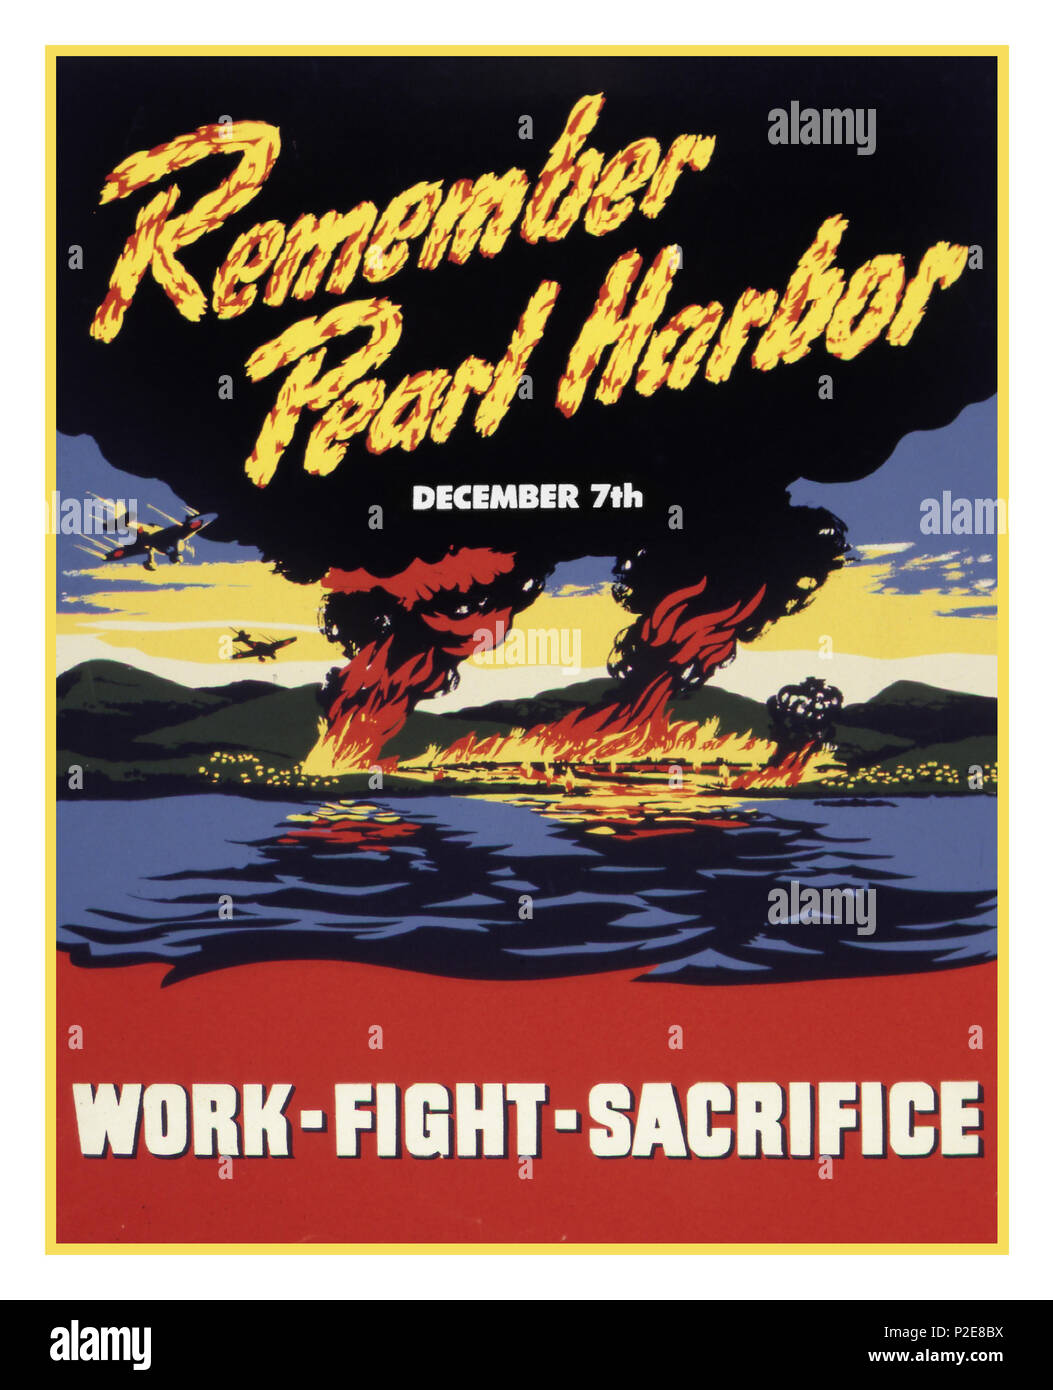 Vintage American WW2 Propaganda Recruitment Poster 'Remember Pearl Harbor' December 7th 1941 'WORK FIGHT SACRIFICE'  An infamous surprise attack by Japan on American Naval Forces in Pearl Harbor, a horrific war of attrition ensued, which finally ended with the brutal forces of Japan and its civilian people in surrender, after Atomic Bombs were dropped on Hiroshima and Nagasaki... Stock Photo